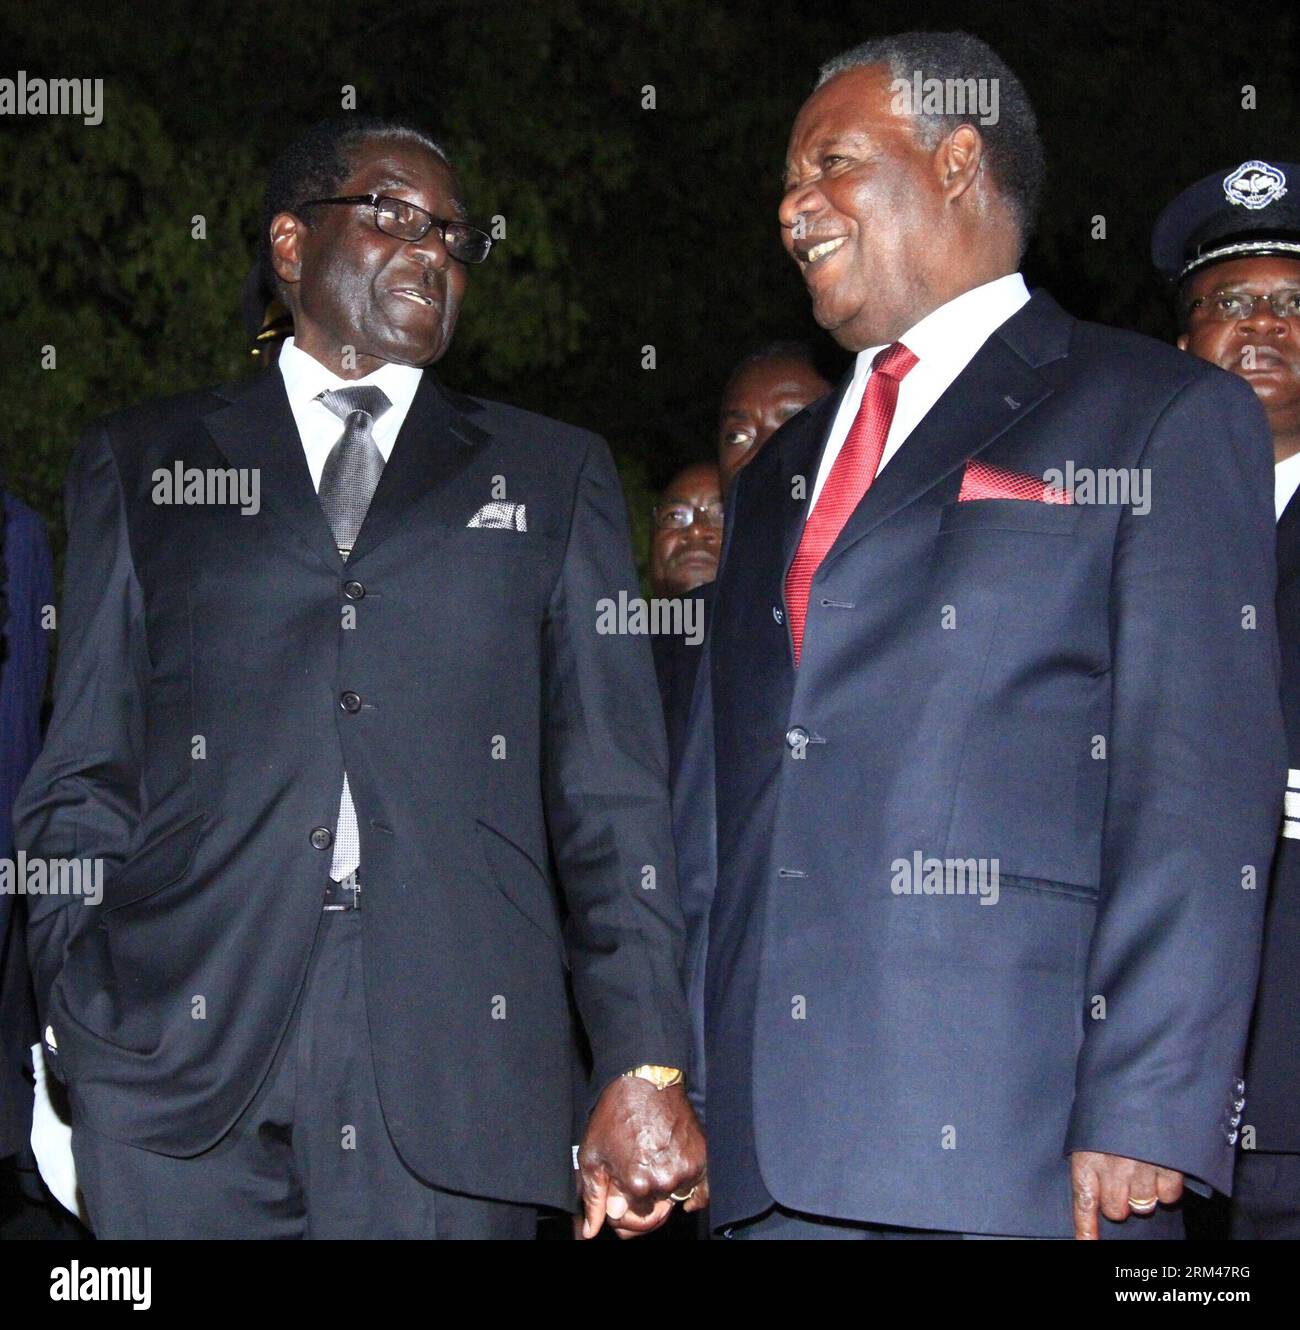 Bildnummer: 60392010  Datum: 25.08.2013  Copyright: imago/Xinhua VICTORIA FALLS, Aug. 25, 2013 - Zambian President Michael Sata (R) and his Zimbabwean counterpart Robert Mugabe attend the opening ceremony of the 20th session of the UNWTO General Assembly in Victoria Falls city, Zimbabwe, Aug. 25, 2013. Zimbabwe and Zambia co-hosted the 20th session of the UNWTO General Assembly, the first time for southern Africa and second time for sub-Saharan Africa to host the event. (Xinhua) ZIMBABWE-VICTORIA FALLS-UNWTO-OPENING PUBLICATIONxNOTxINxCHN People Politik xcb x0x 2013 quadrat premiumd     603920 Stock Photo